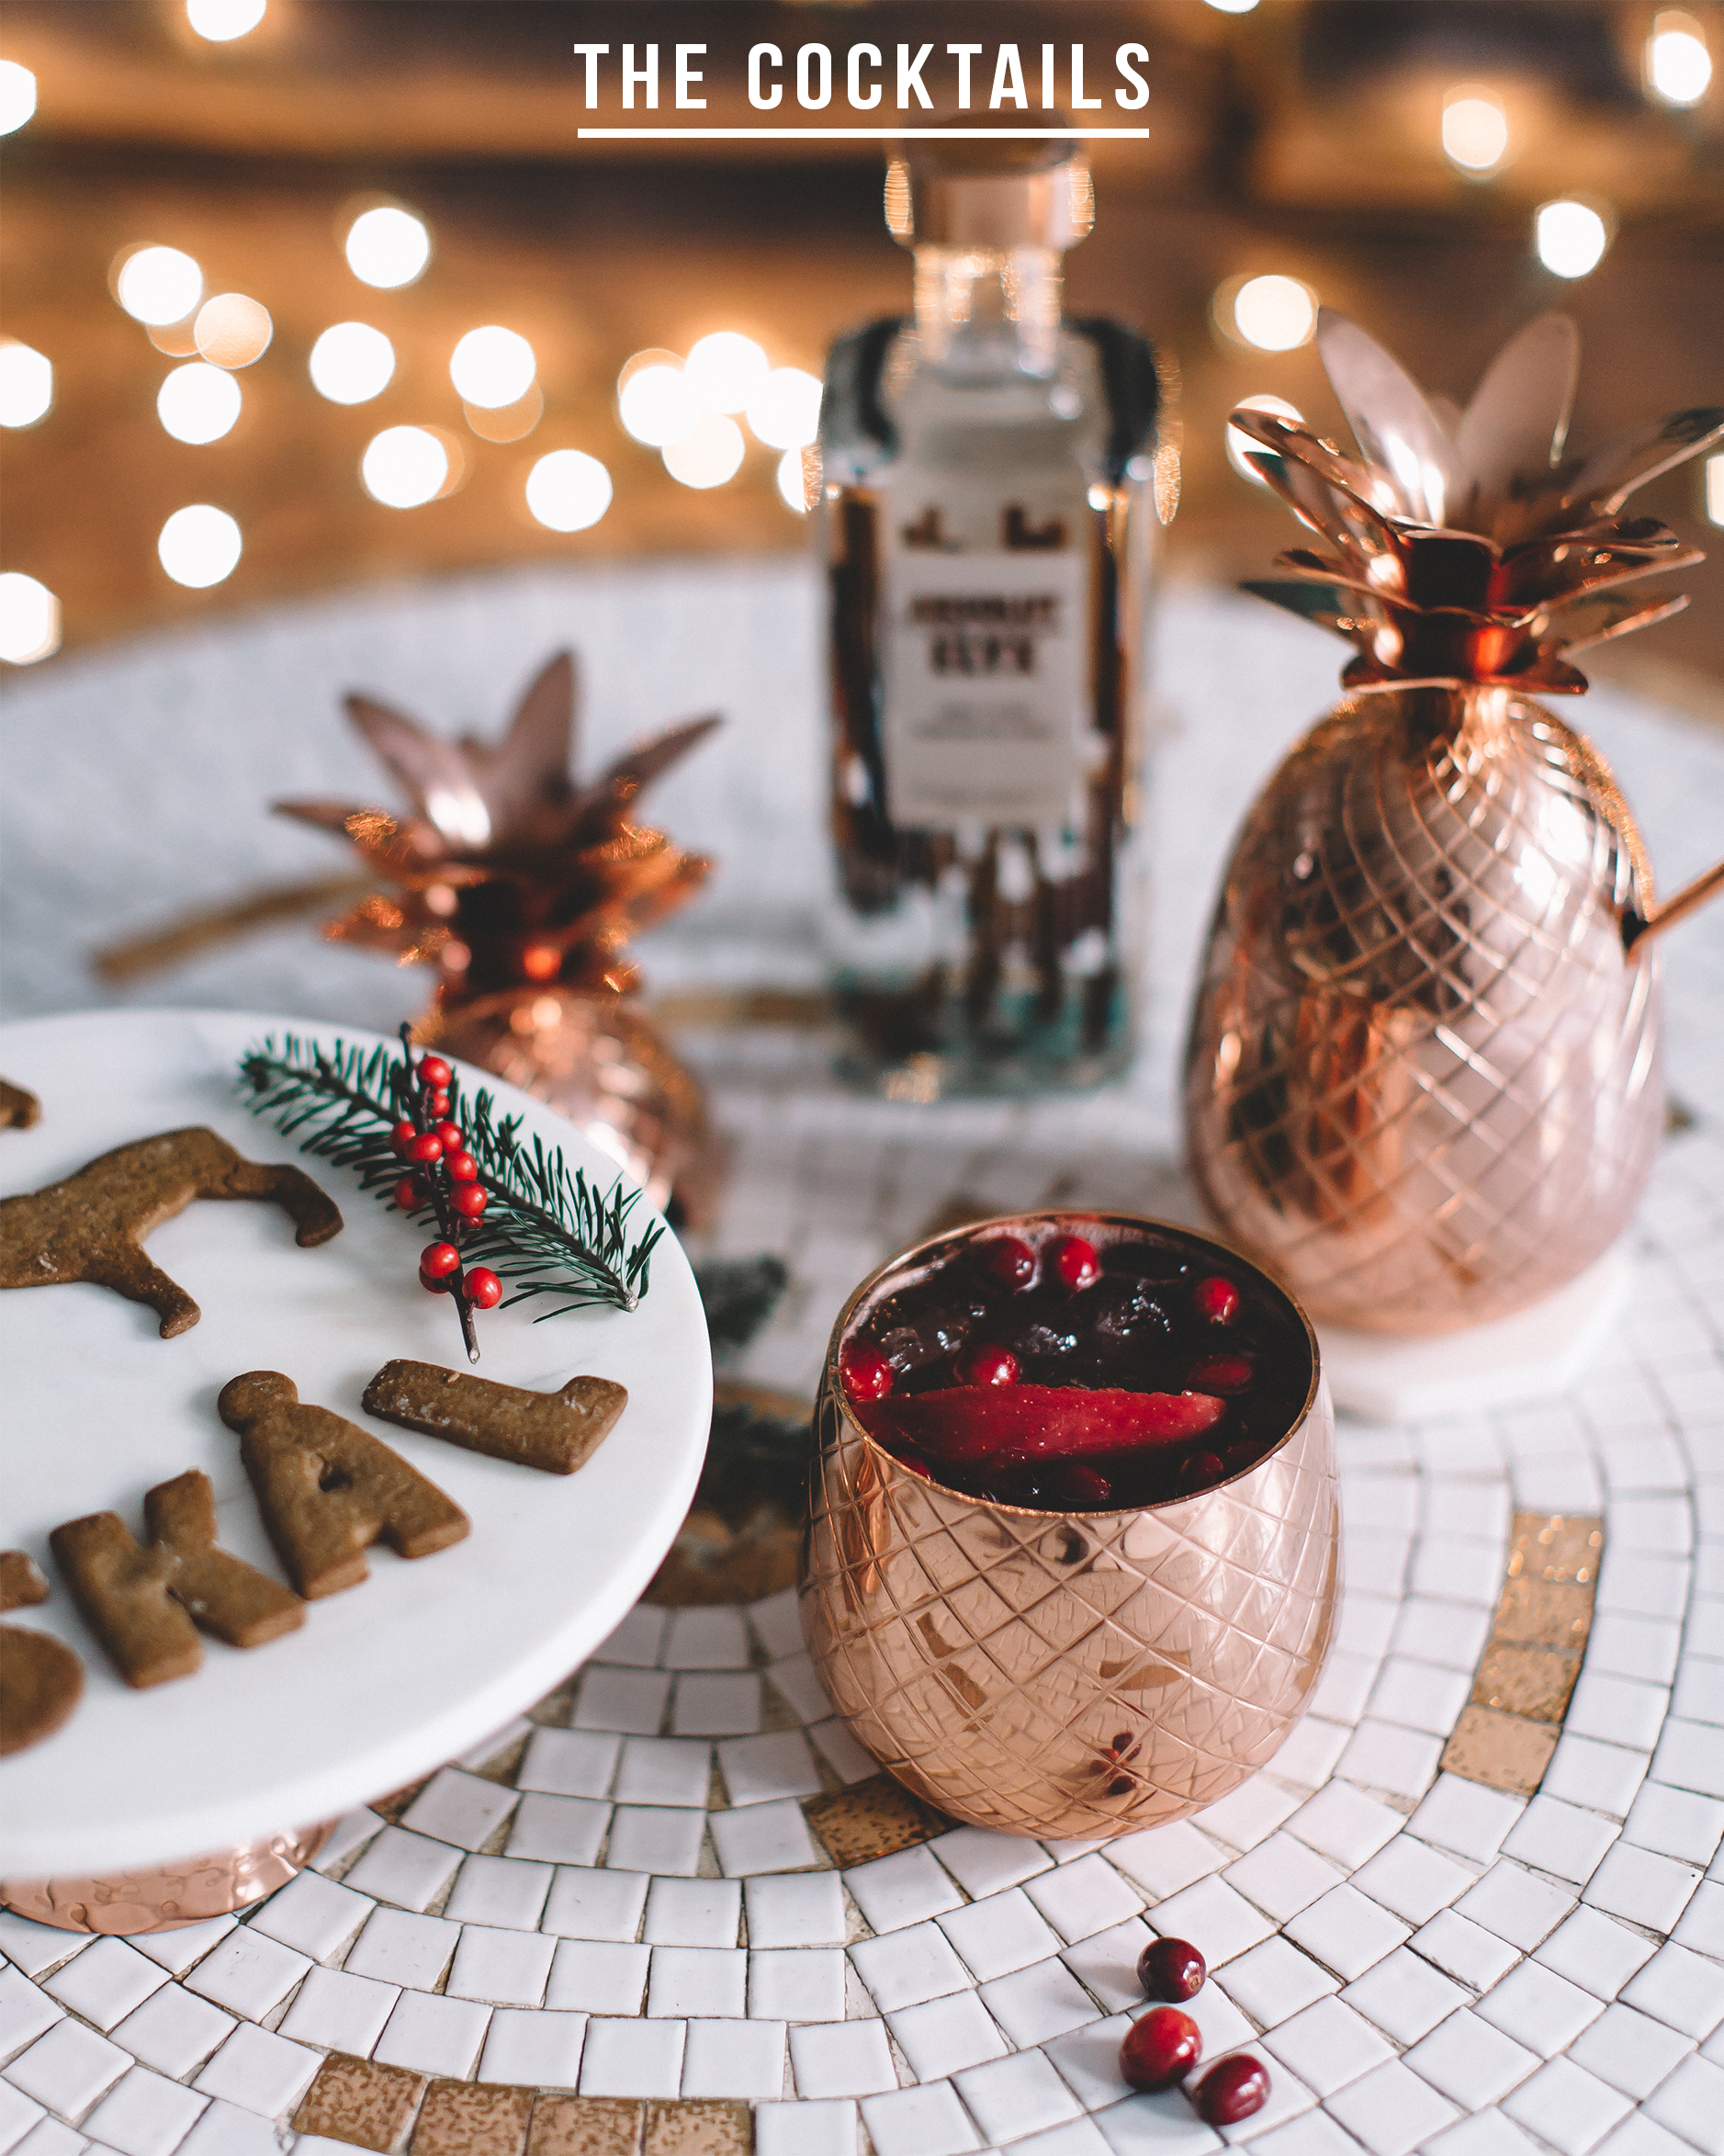 http://www.brightbazaarblog.com/wp-content/uploads/2016/12/how-to-throw-swedish-cocktail-party-absolut-elyx-1.jpg